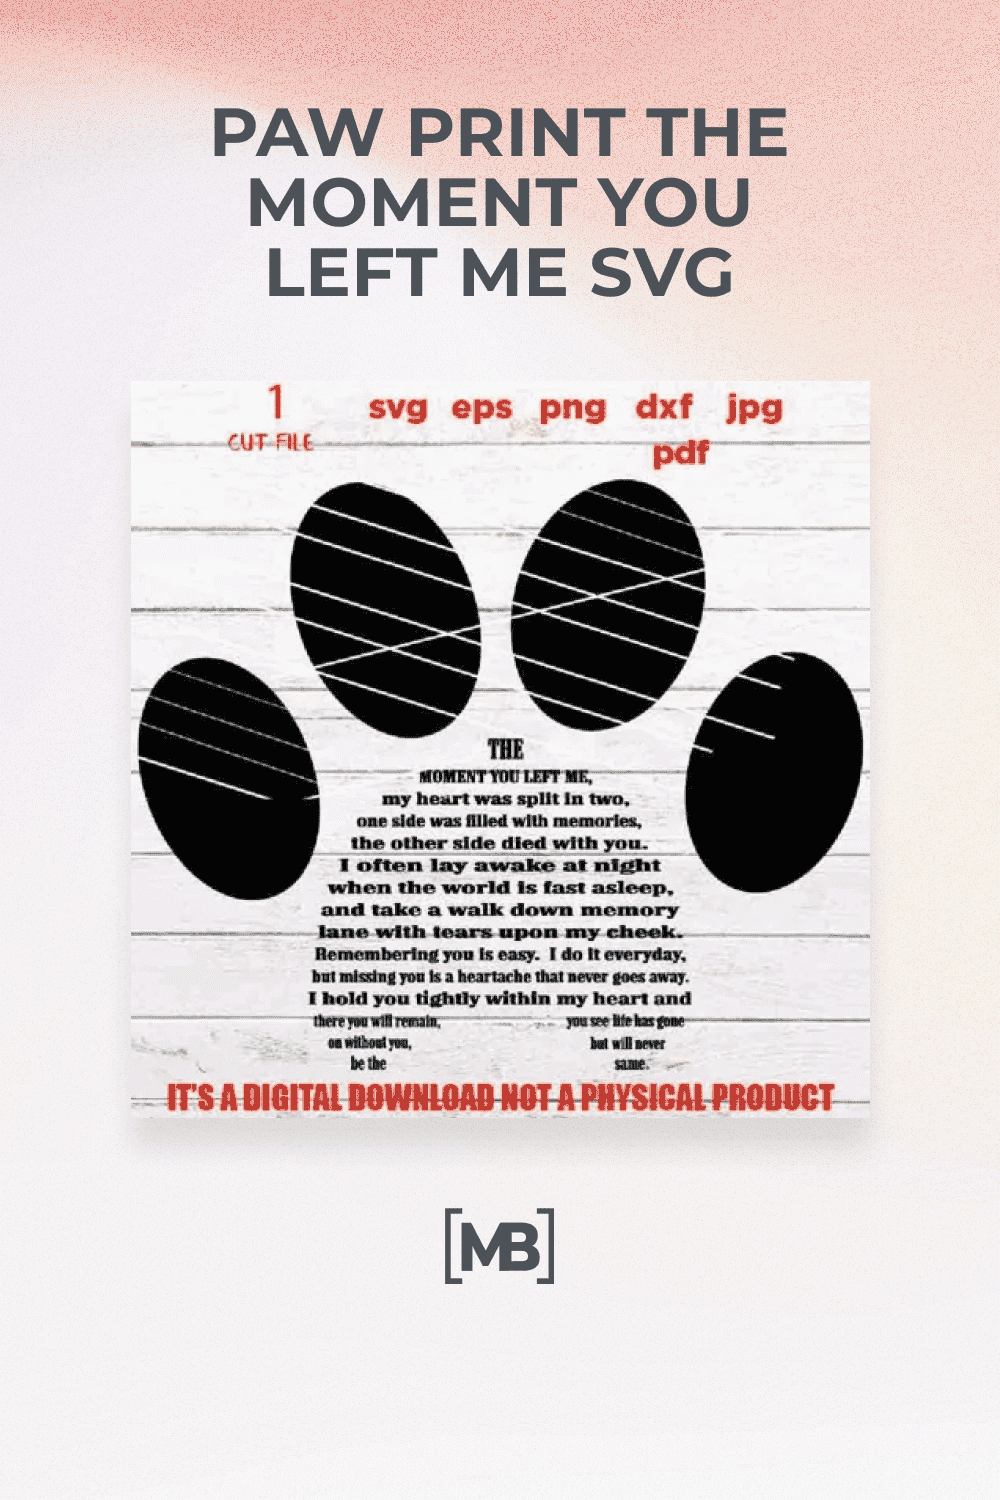 Paw Print the moment you left me svg.